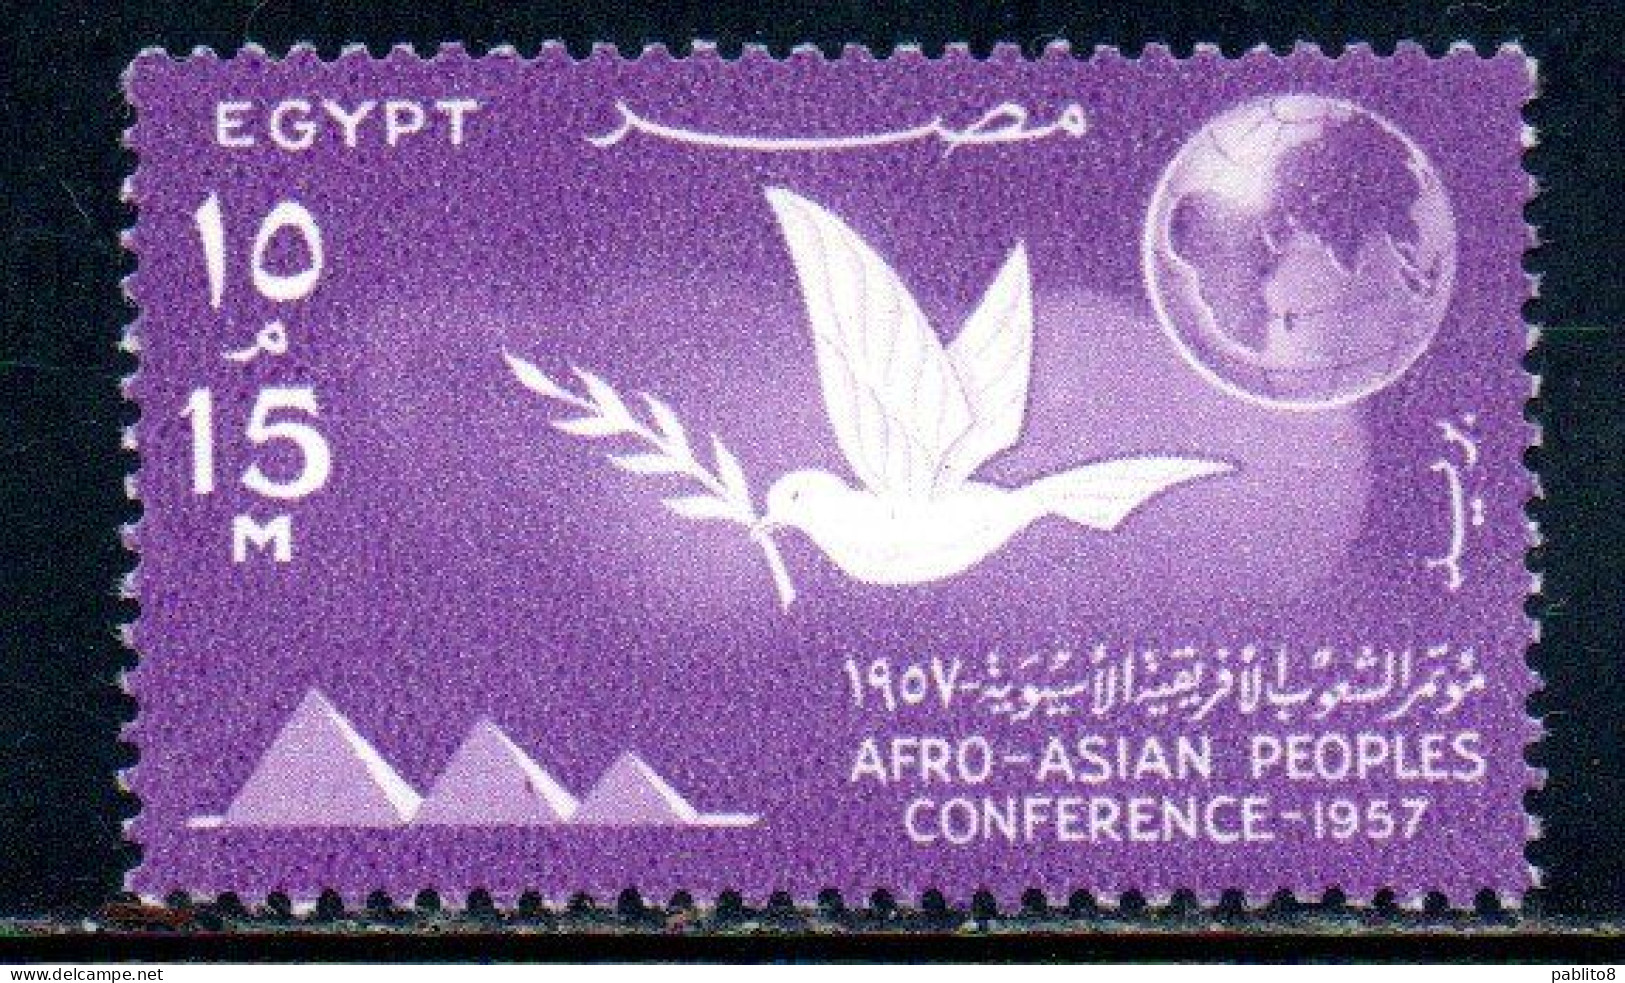 UAR EGYPT EGITTO 1957 AFRO-ASIAN PEOPLES CONFERENCE CAIRO PYRAMIDS DOVE AND GLOBE 15m MNH - Neufs